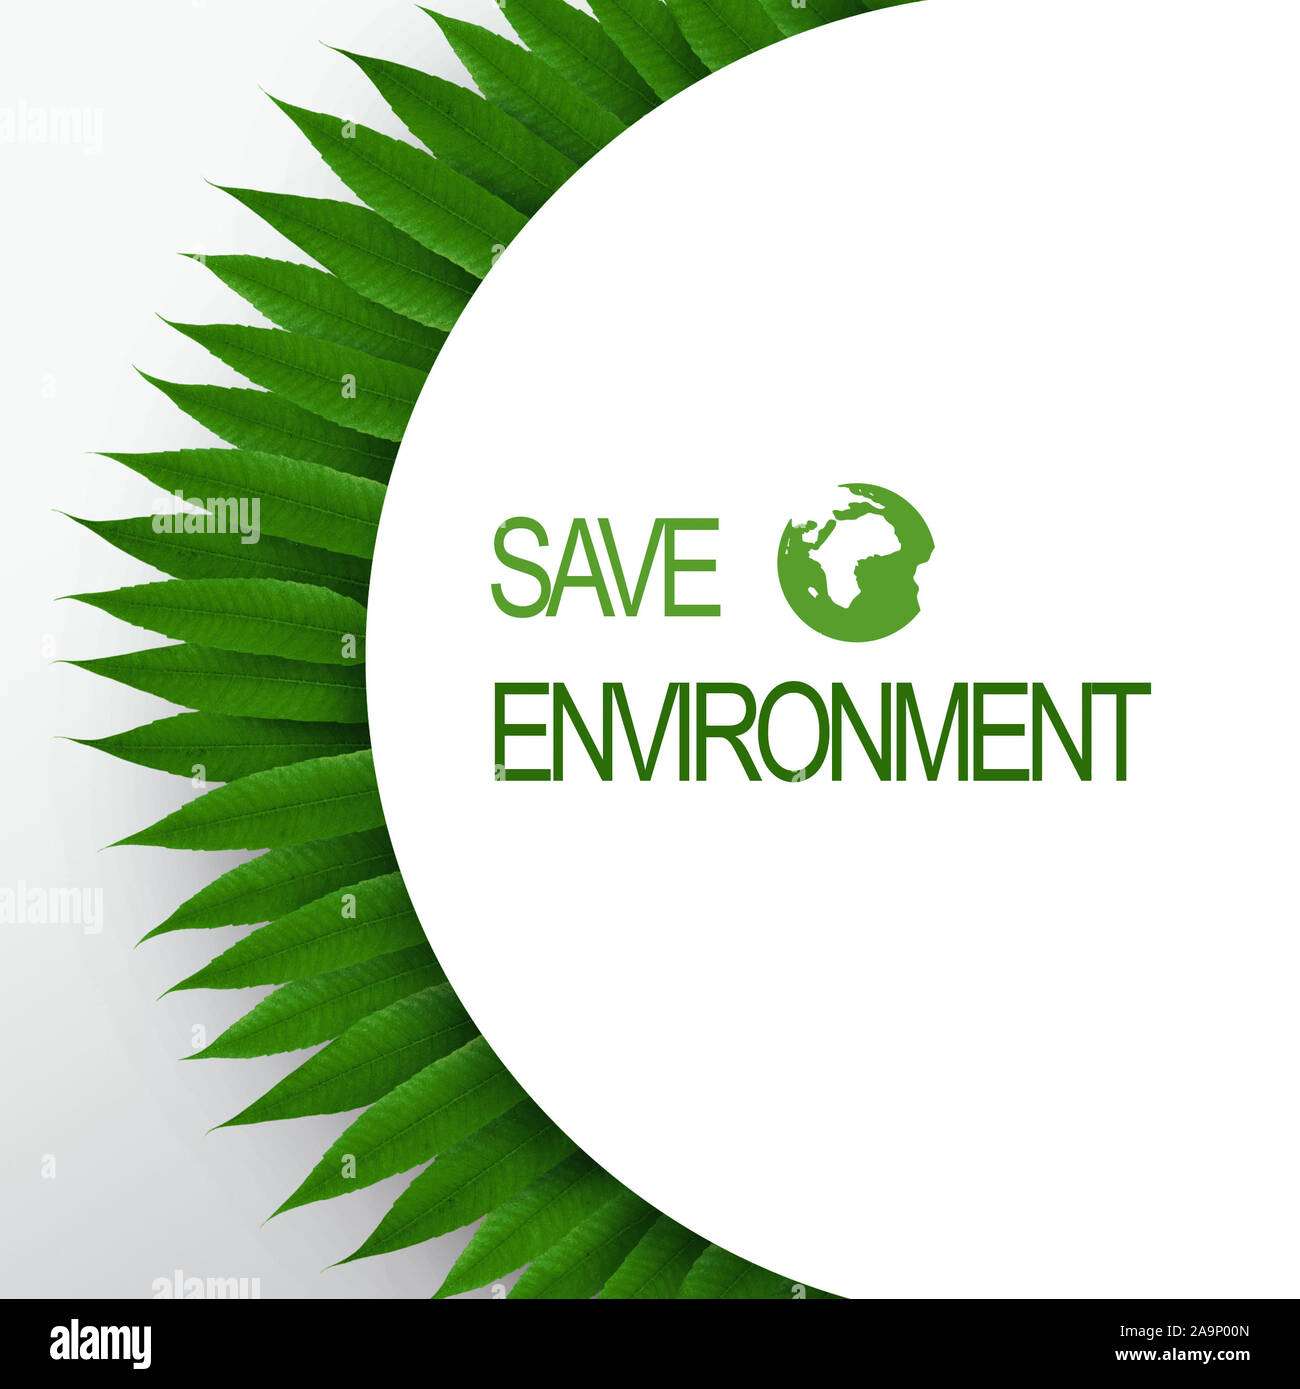 Save environment poster with fresh green leaves Stock Photo